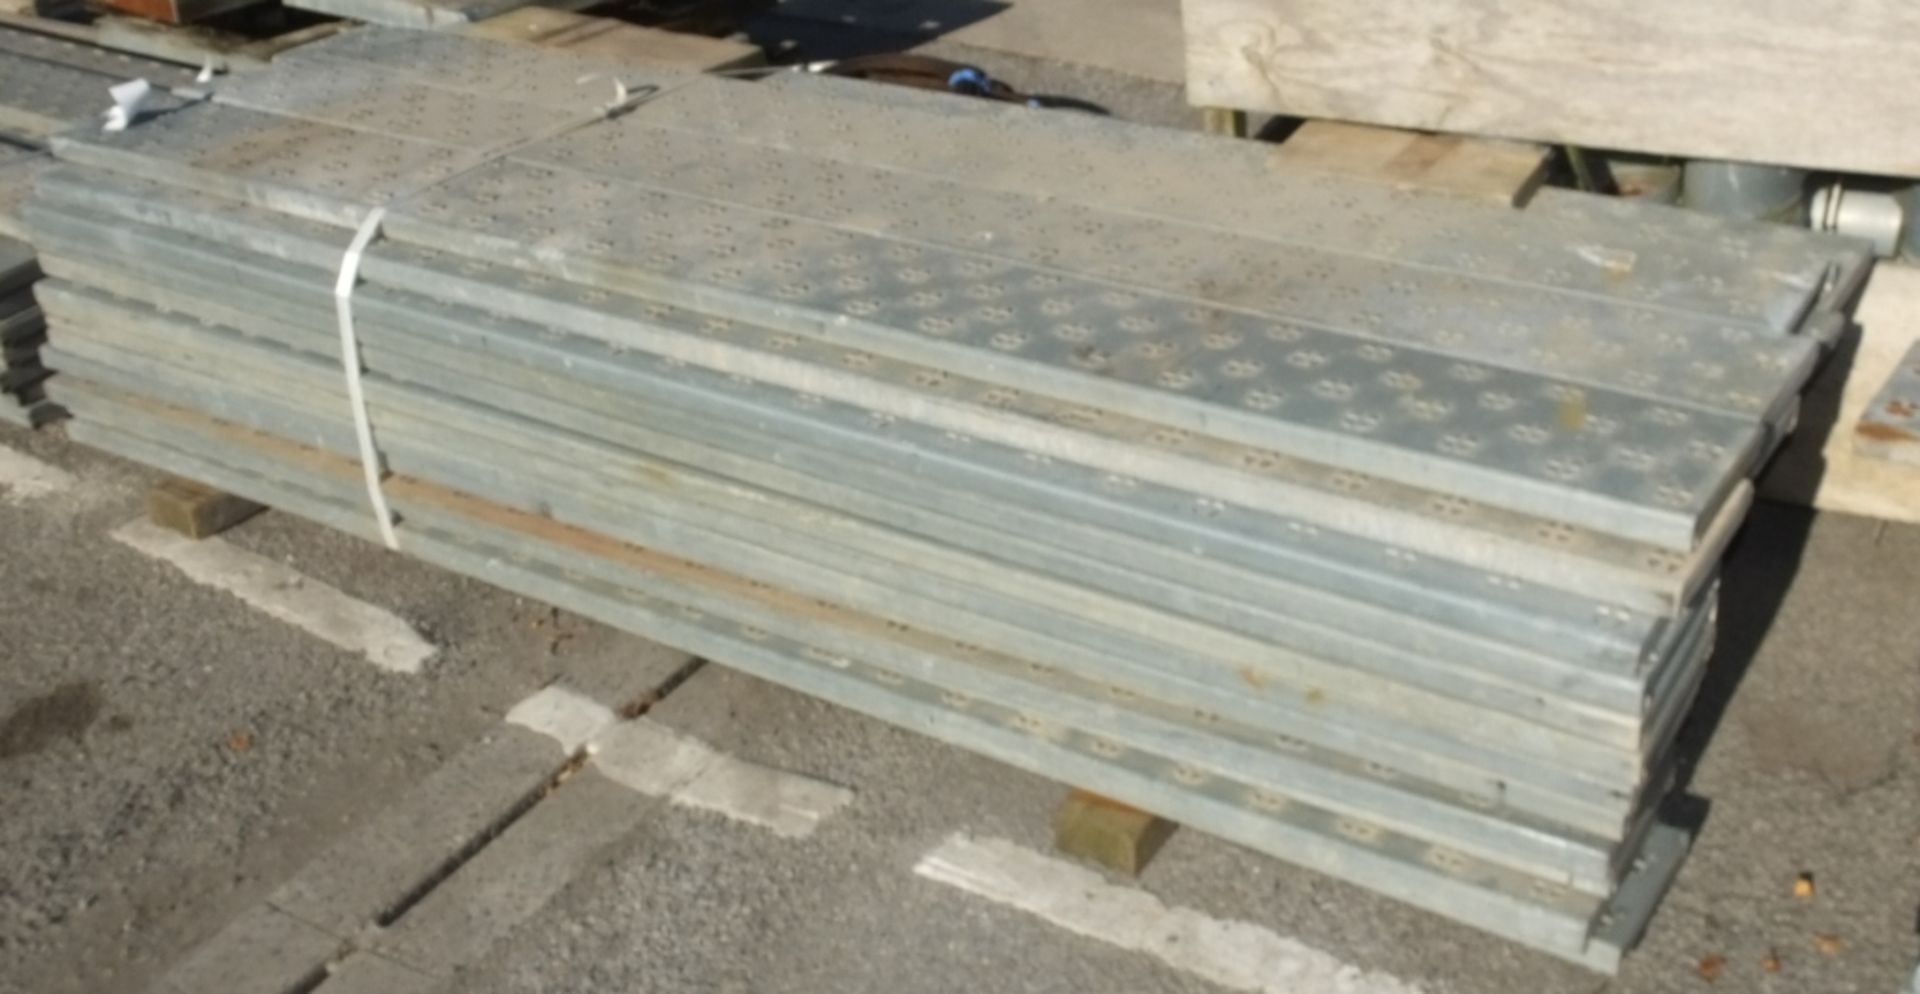 51x Metal Deck Sections W22.5 x H4 x L183 / 244cm - Image 2 of 3